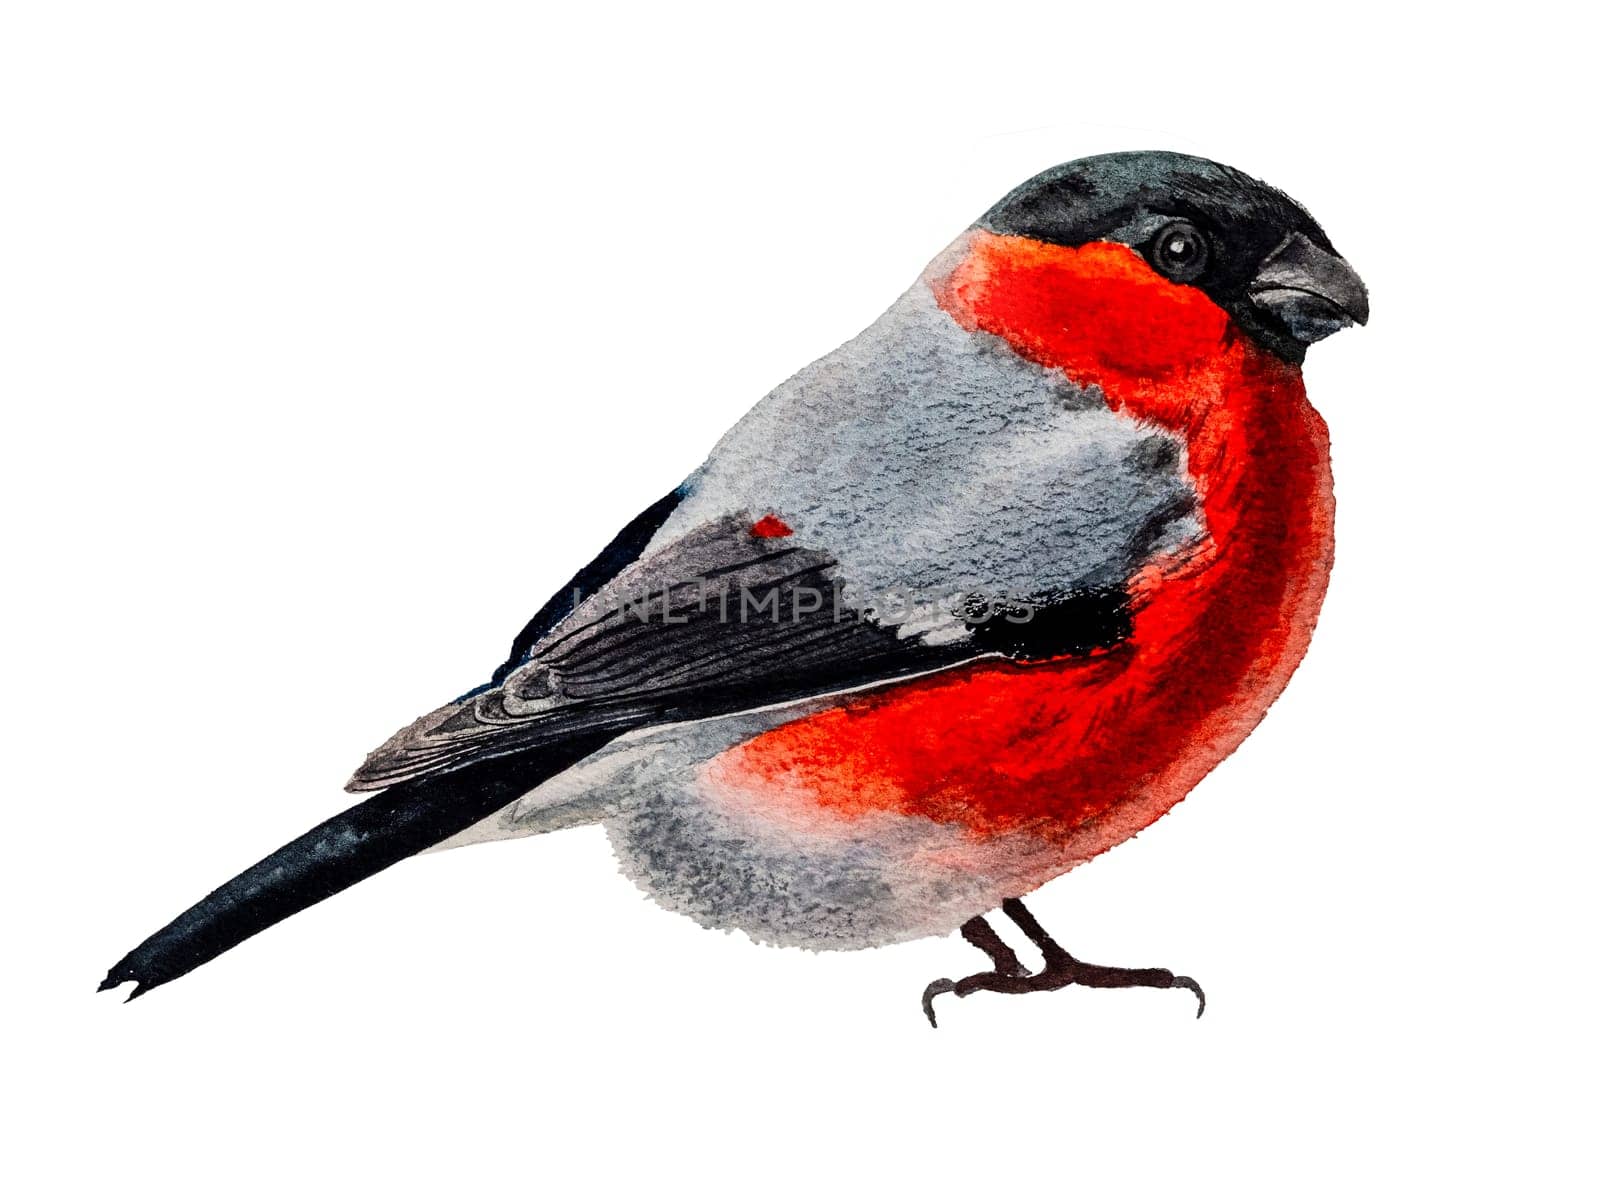 Cute bullfinch in watercolor, isolated on white background with clipping path. Winter bird bullfinch with red underparts and breast drawn in detailed realistic watercolor technique on cotton paper.